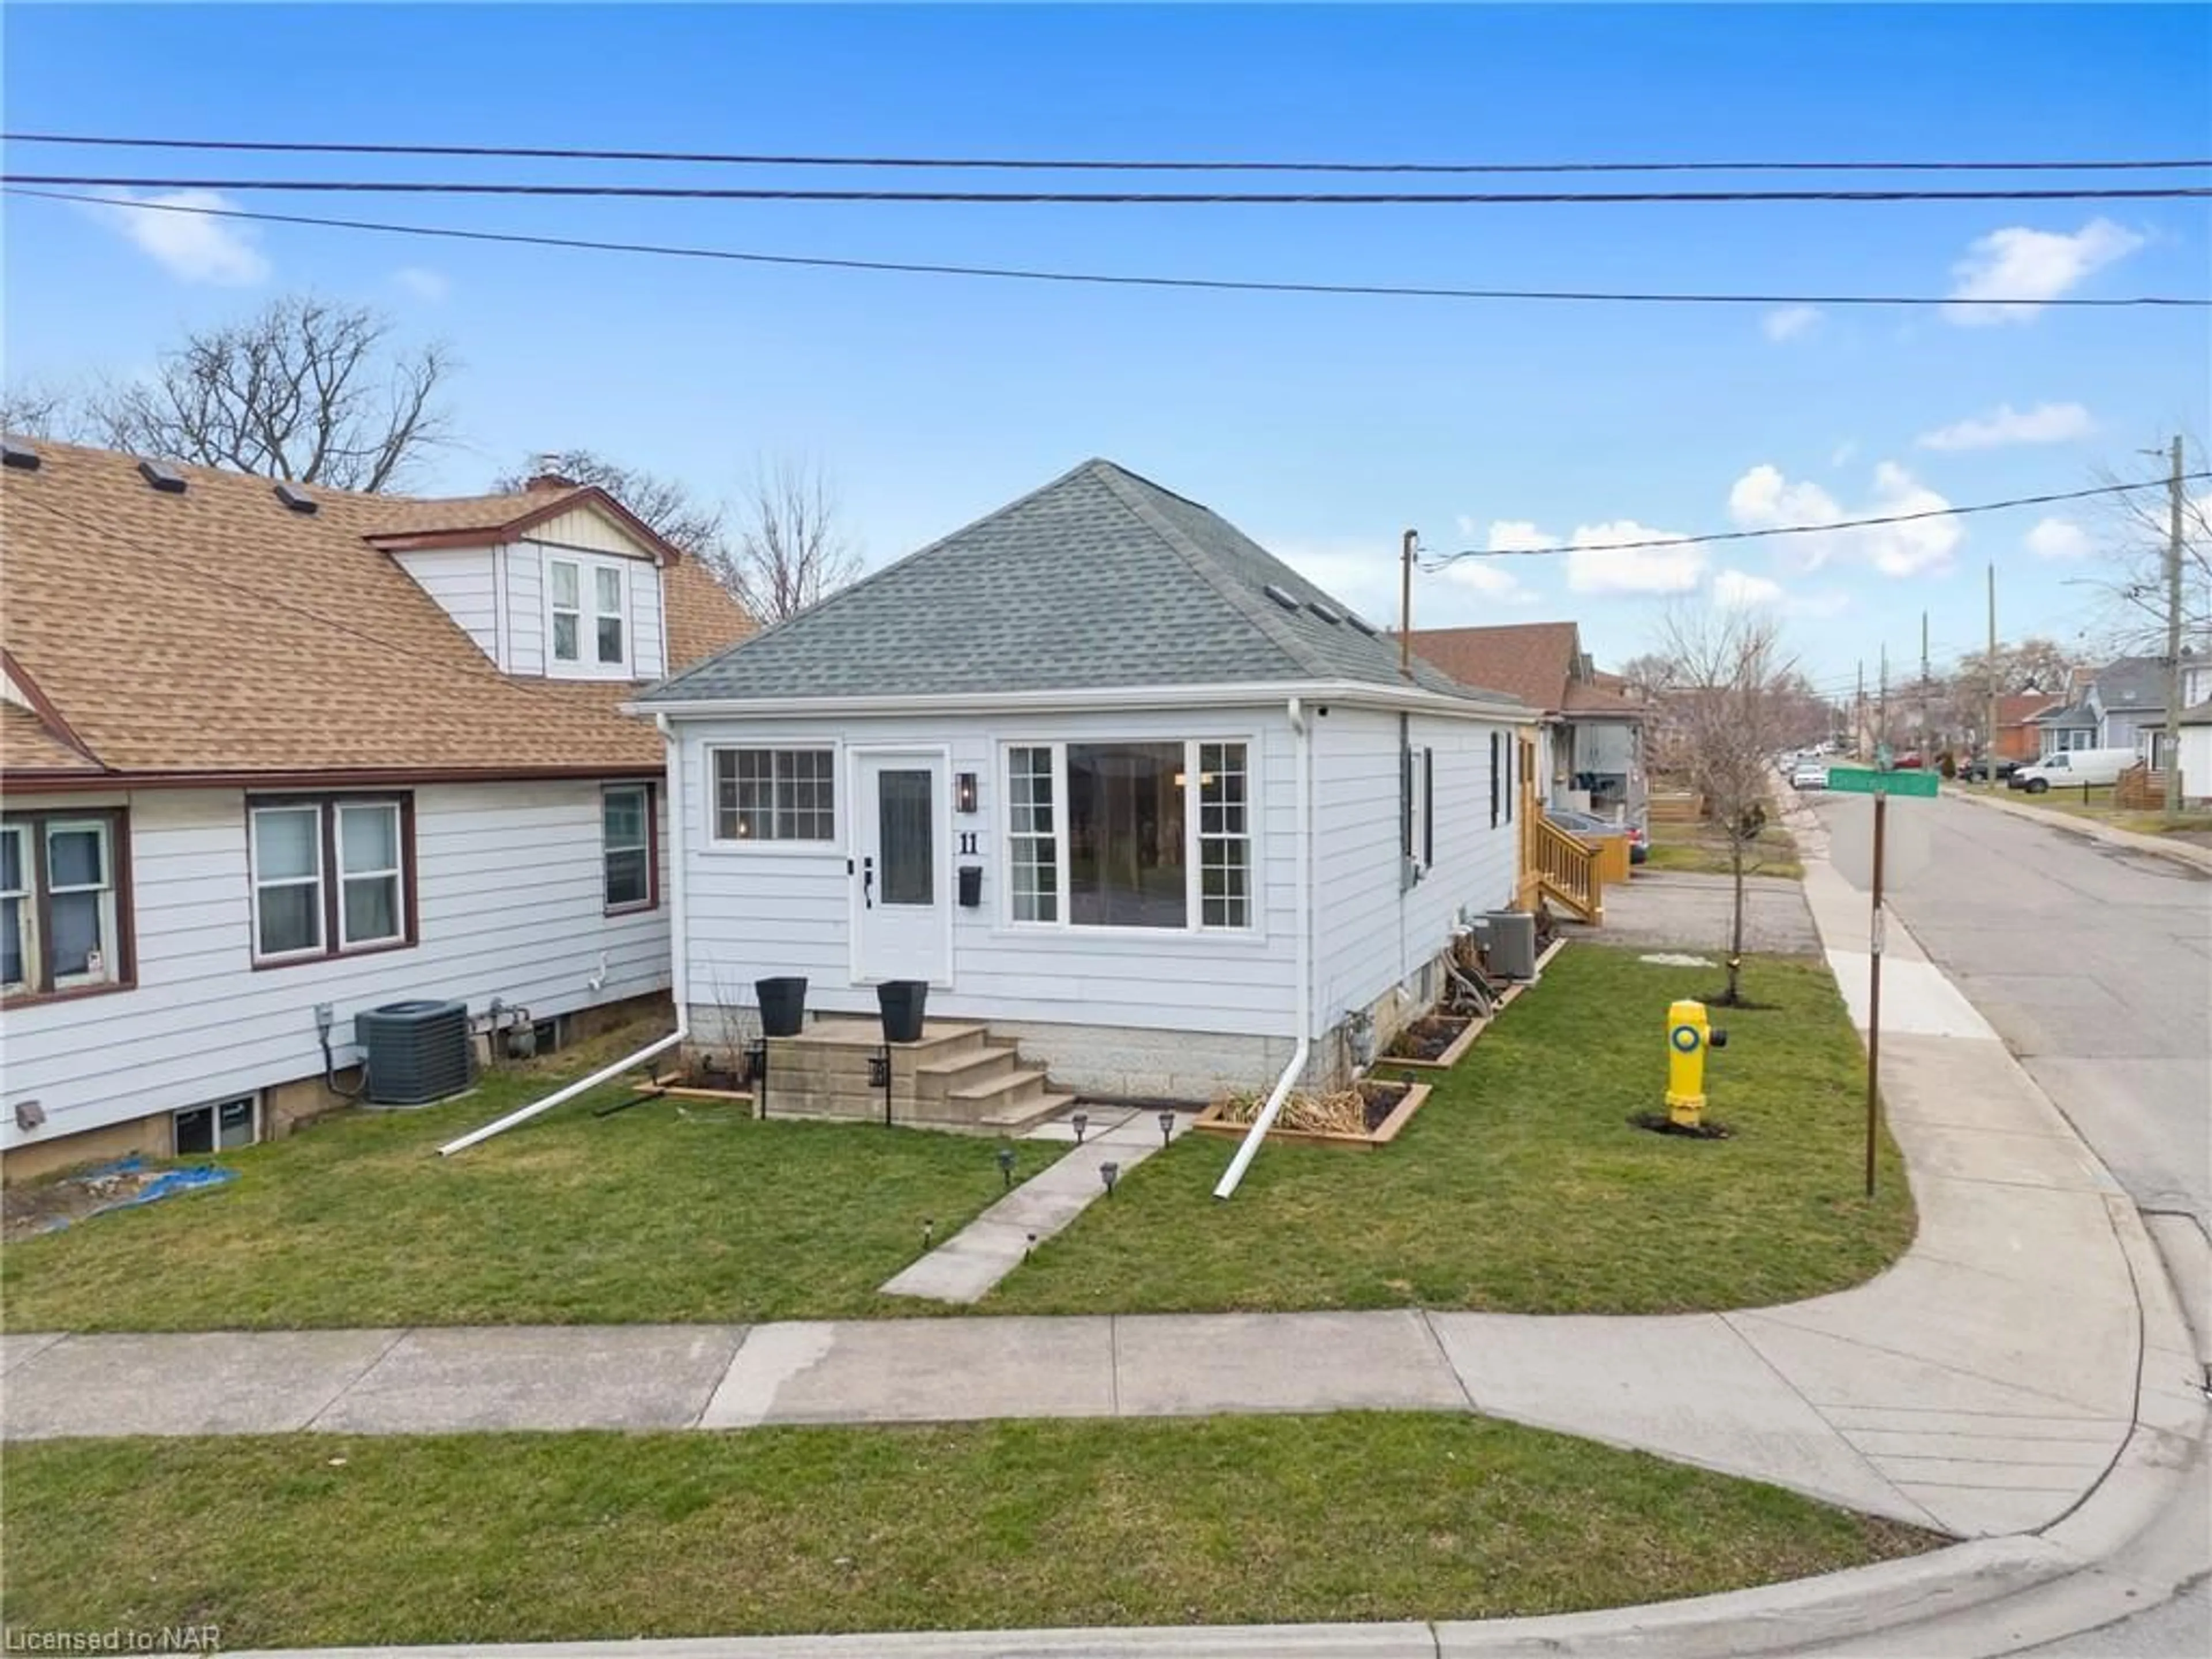 Frontside or backside of a home for 11 Delaware St, St. Catharines Ontario L2M 5L7